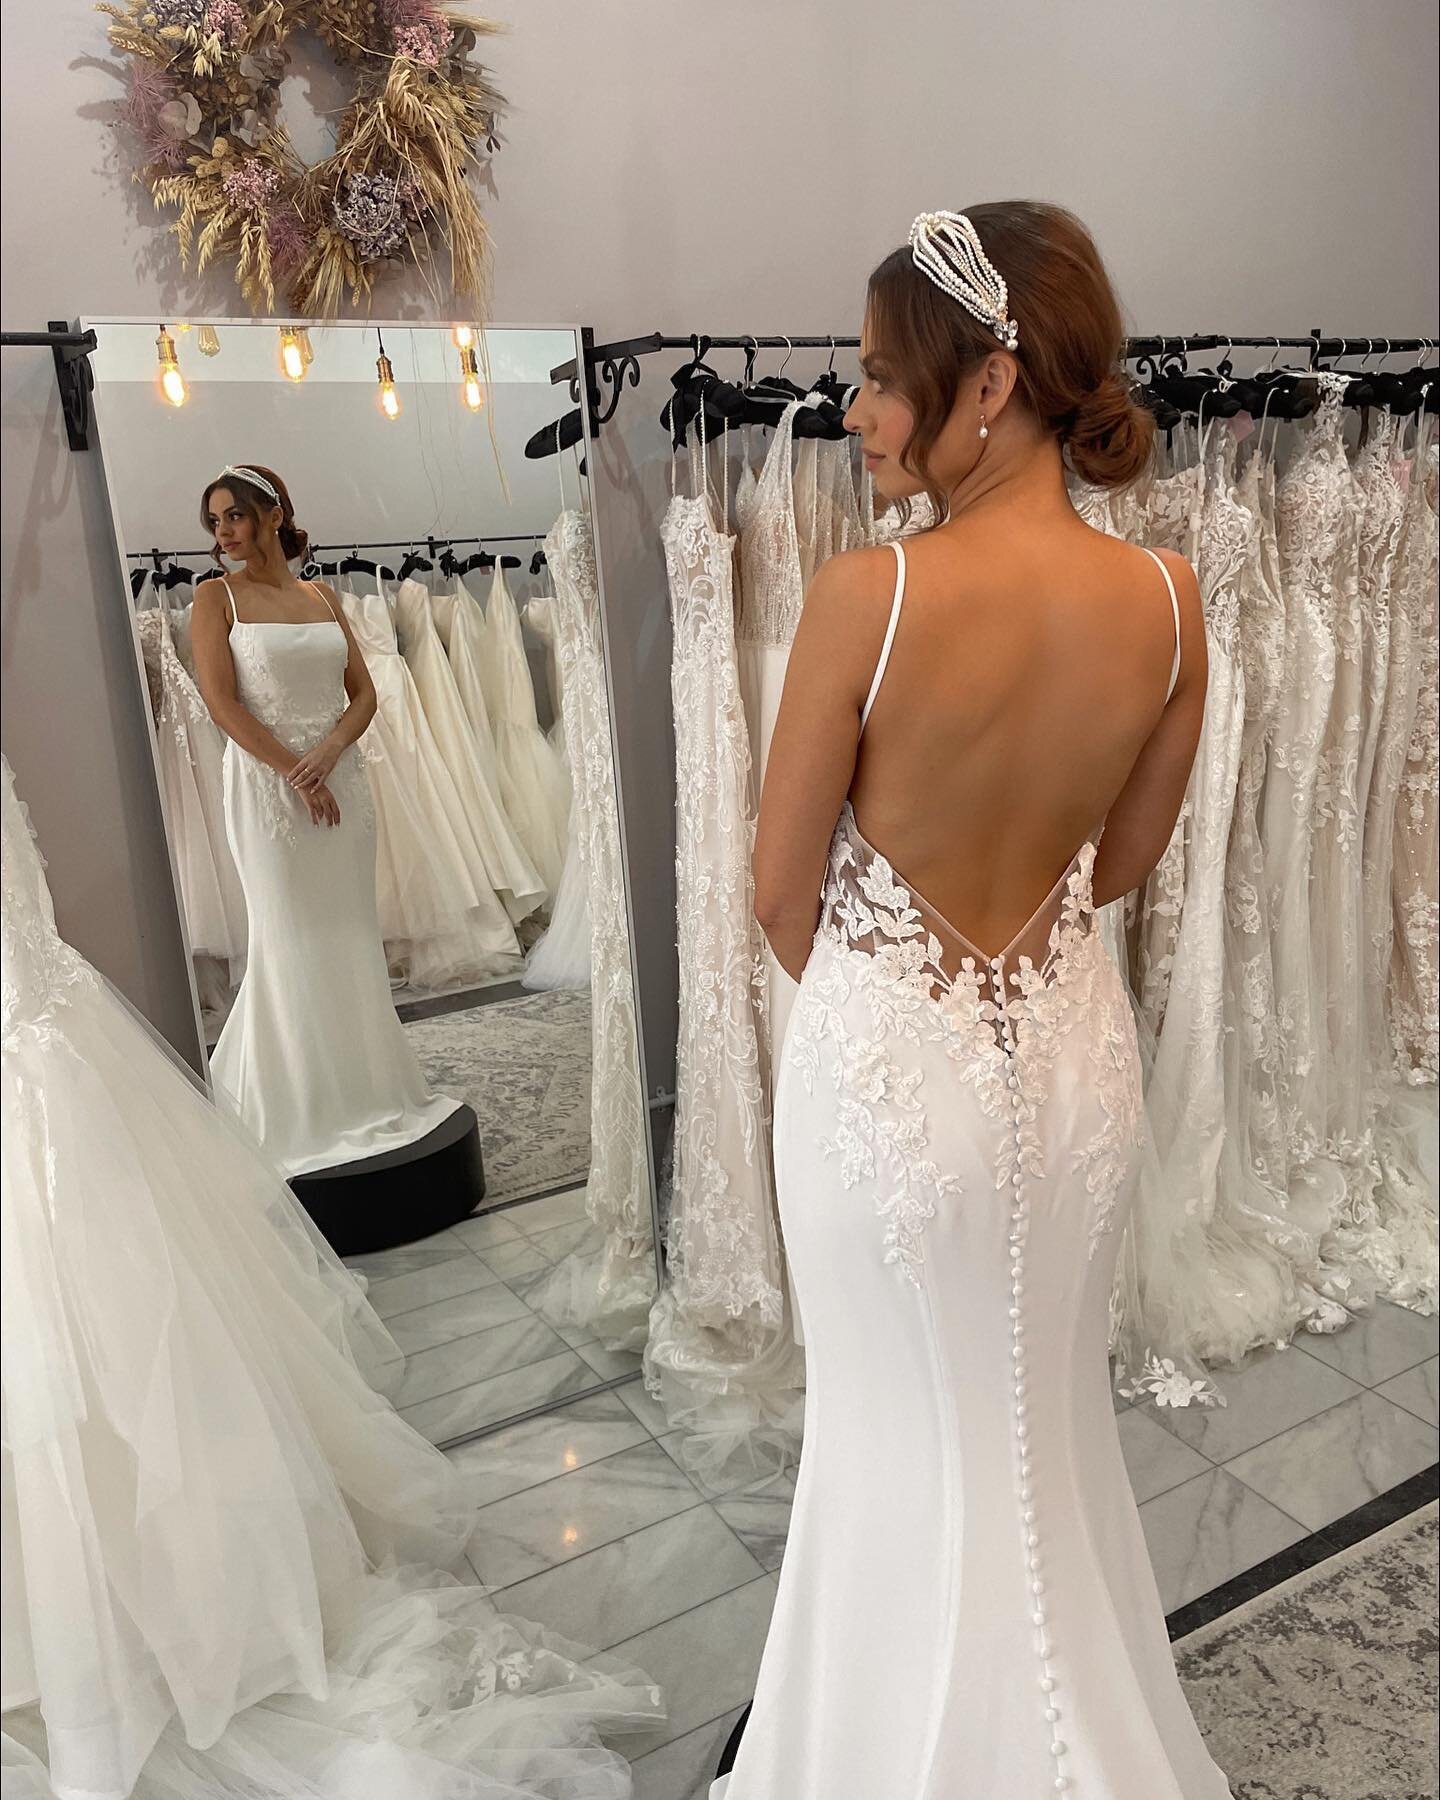 SINCLAIR by @enzoani, new in at @milimilicolchester 🤍 tap the link in bio to book in. 

'Sinclair has a minimalist look with sparkling, 3D beaded floral motifs sprinkled throughout the bodice. Her modern square neckline and delicate spaghetti straps